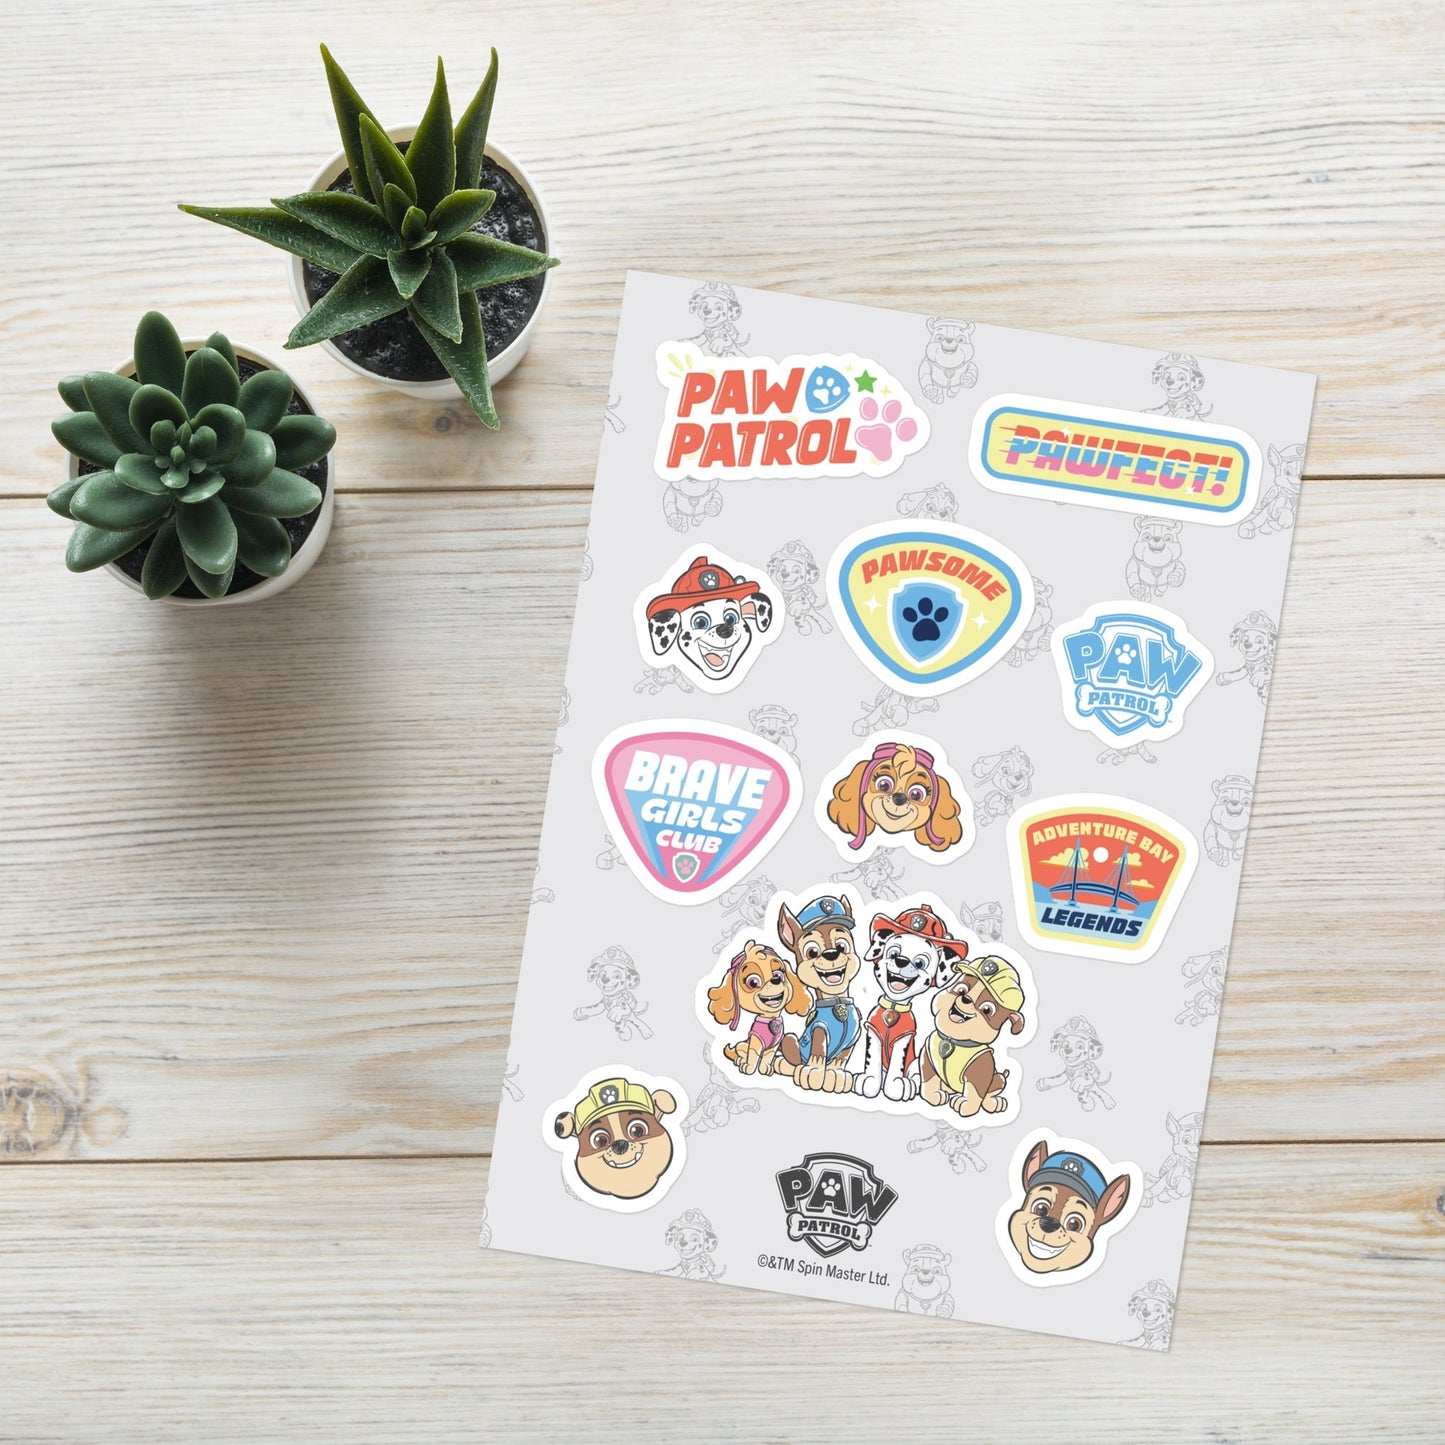 PAW Patrol Roll With The Pack Kiss Cut Sticker Sheet - Paramount Shop